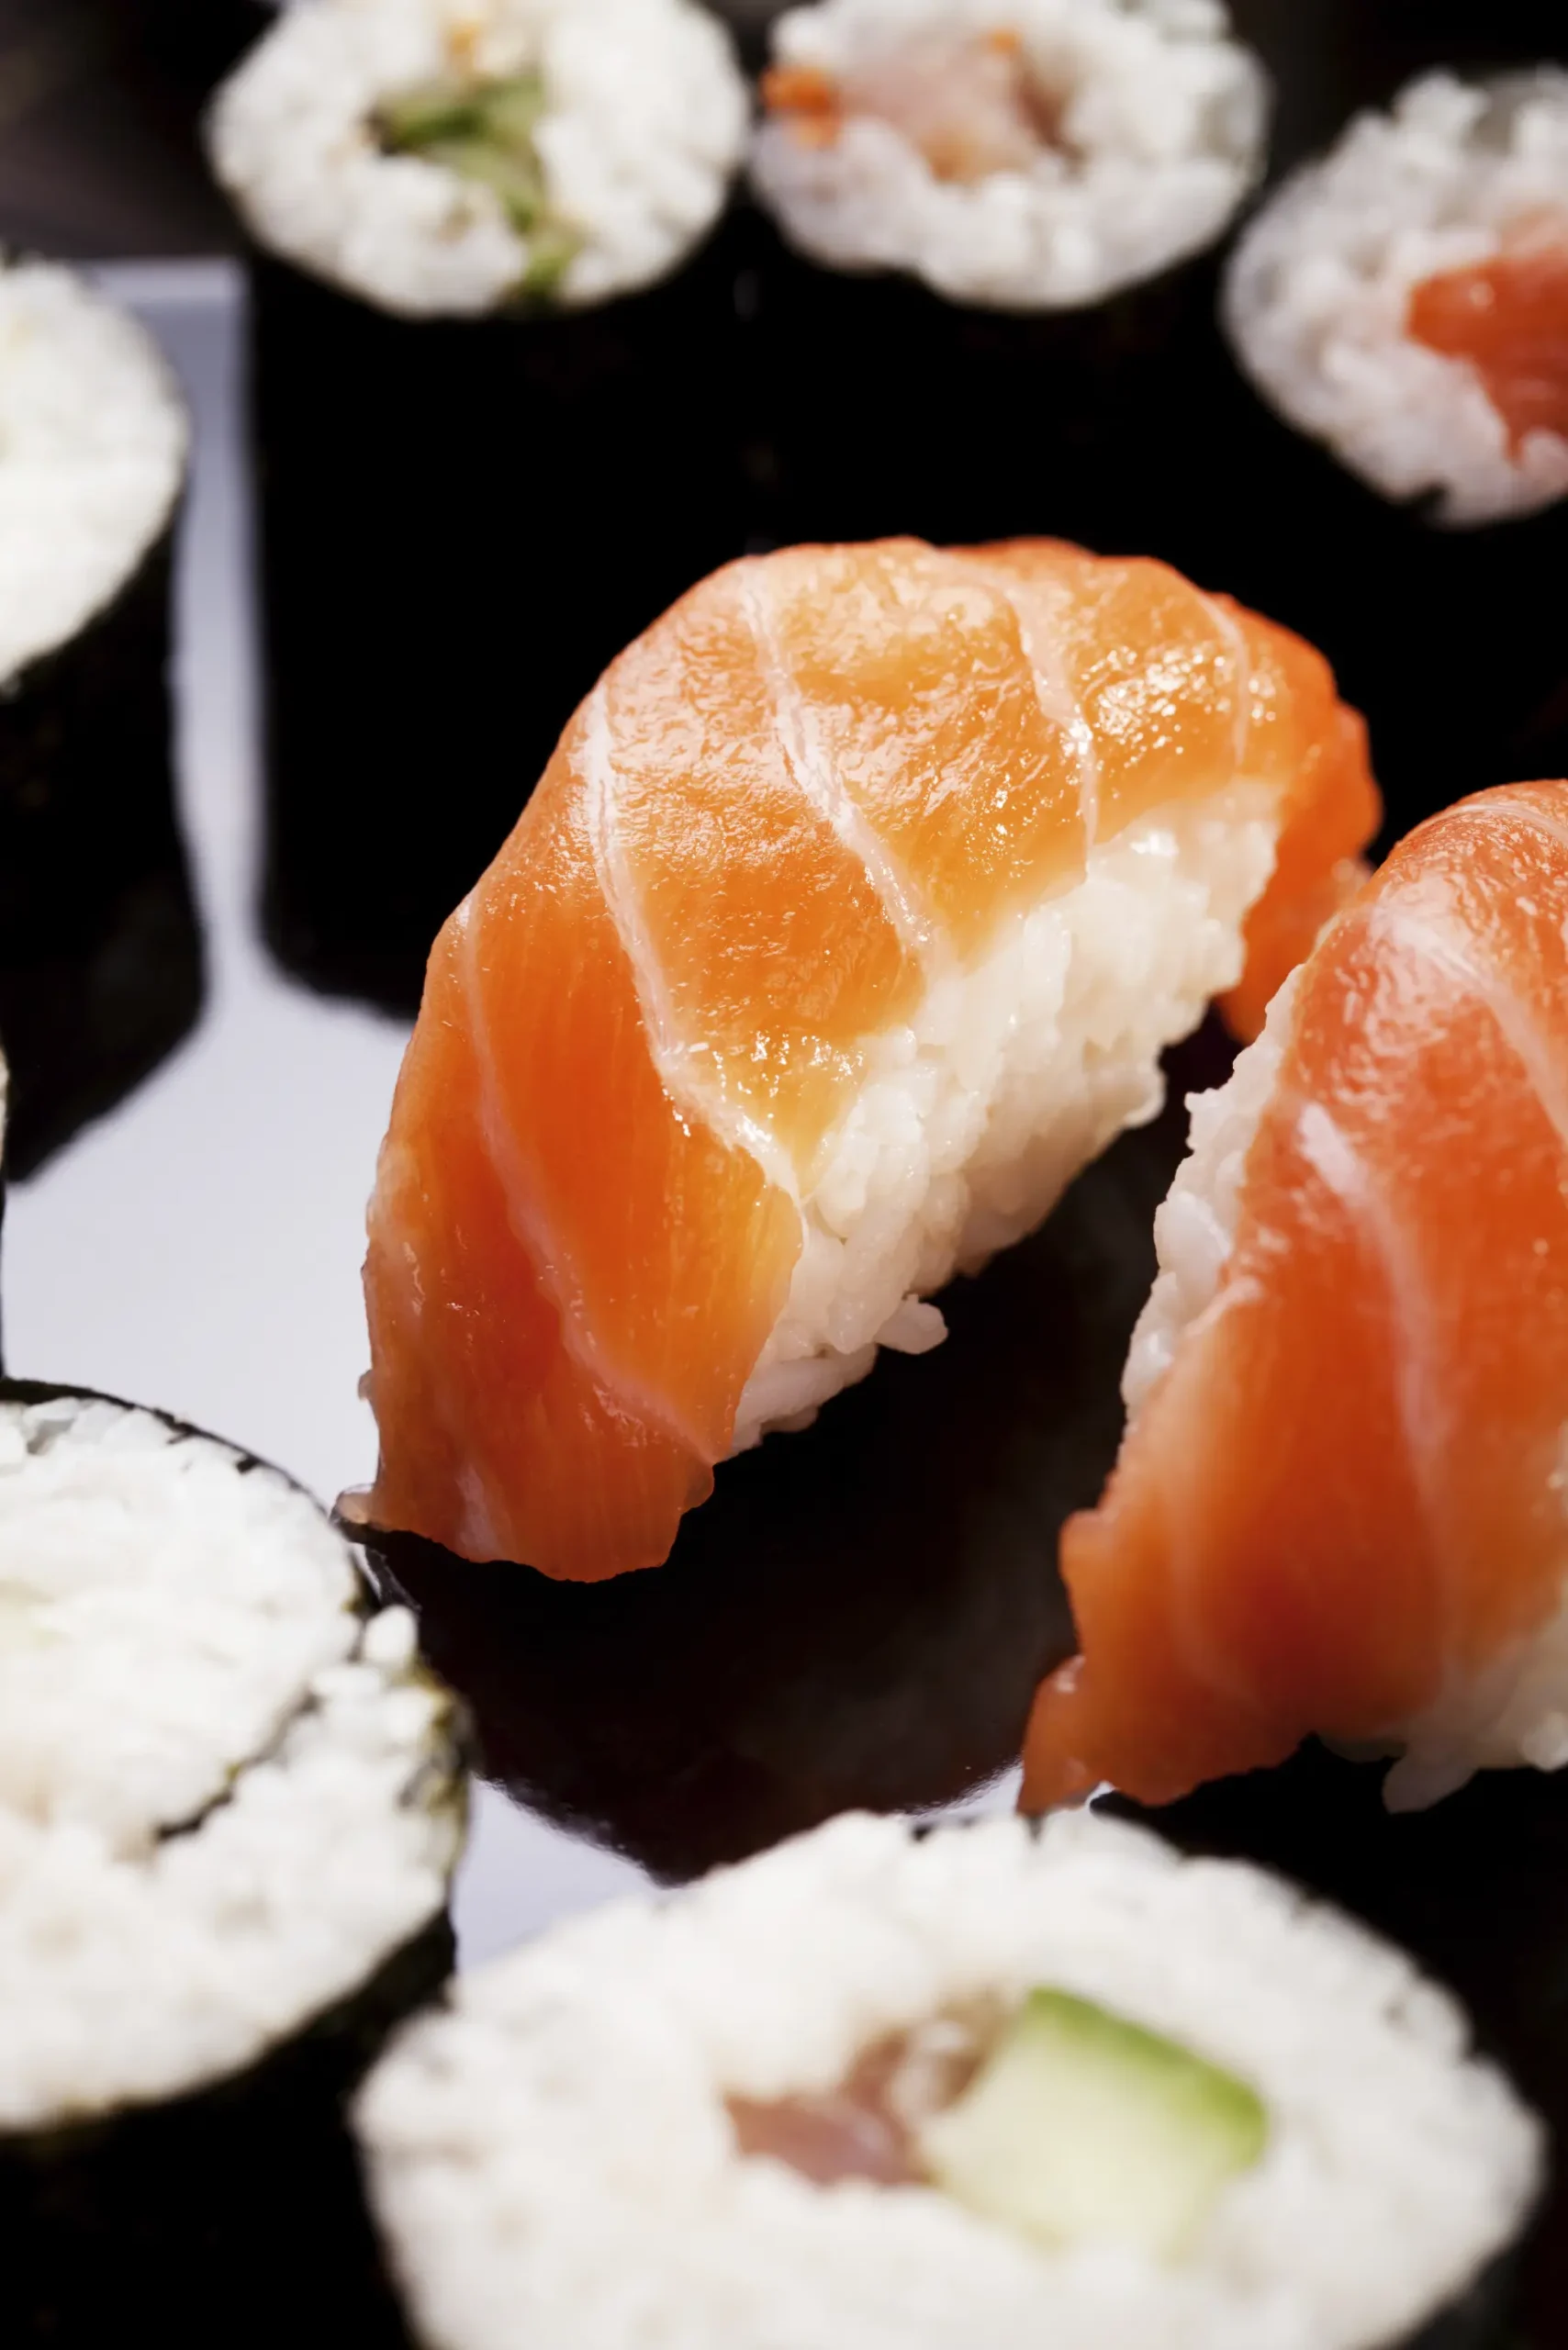 is smoked salmon used in sushi - What kind of salmon is used for sushi